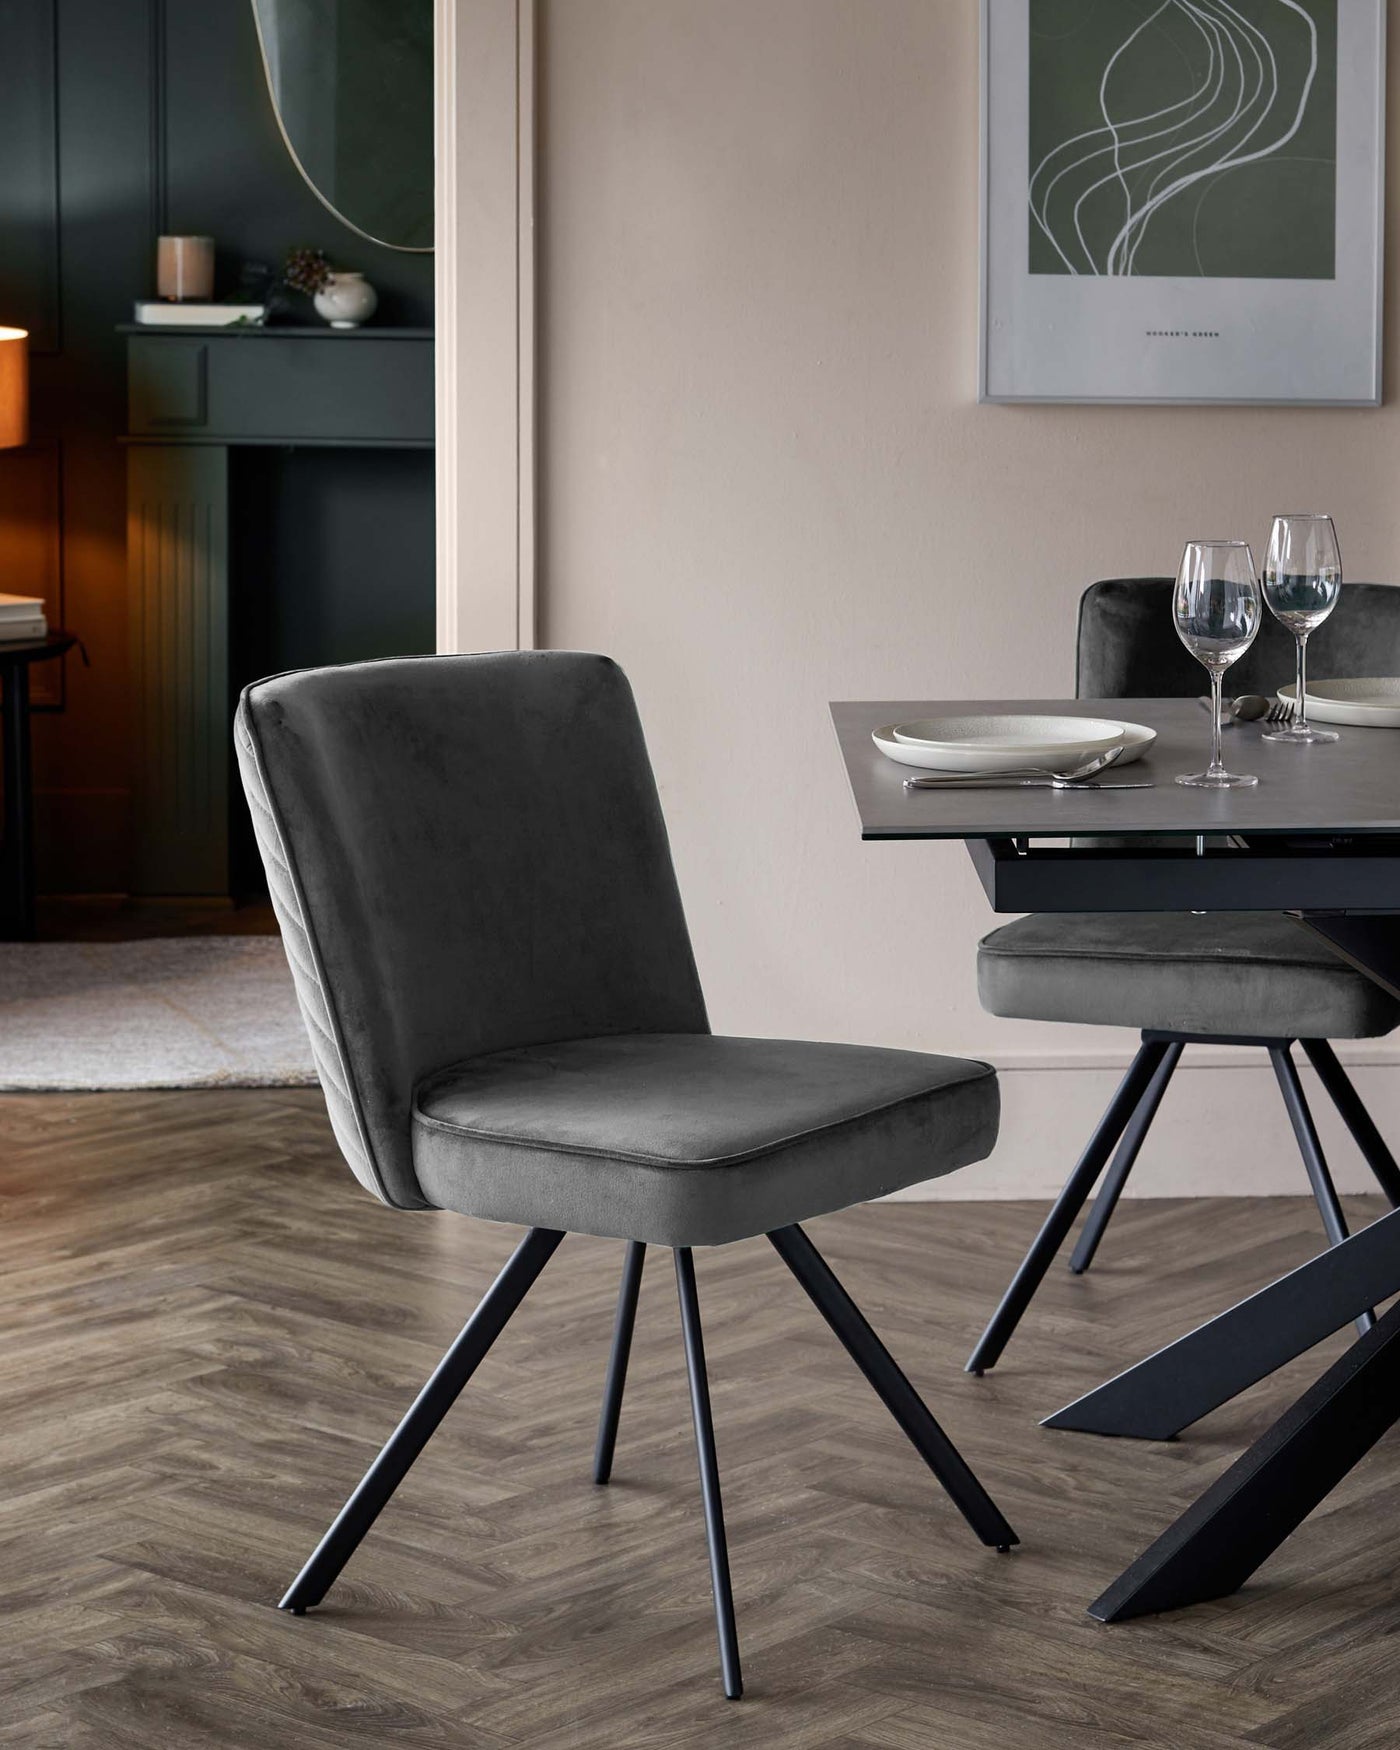 Modern dining room with a grey upholstered chair featuring a smooth, curved backrest and cushioned seat on angled black metal legs. In the background, there's a black contemporary dining table with a tempered glass top and unique geometric black metal legs, partially set with white plates and clear wine glasses.